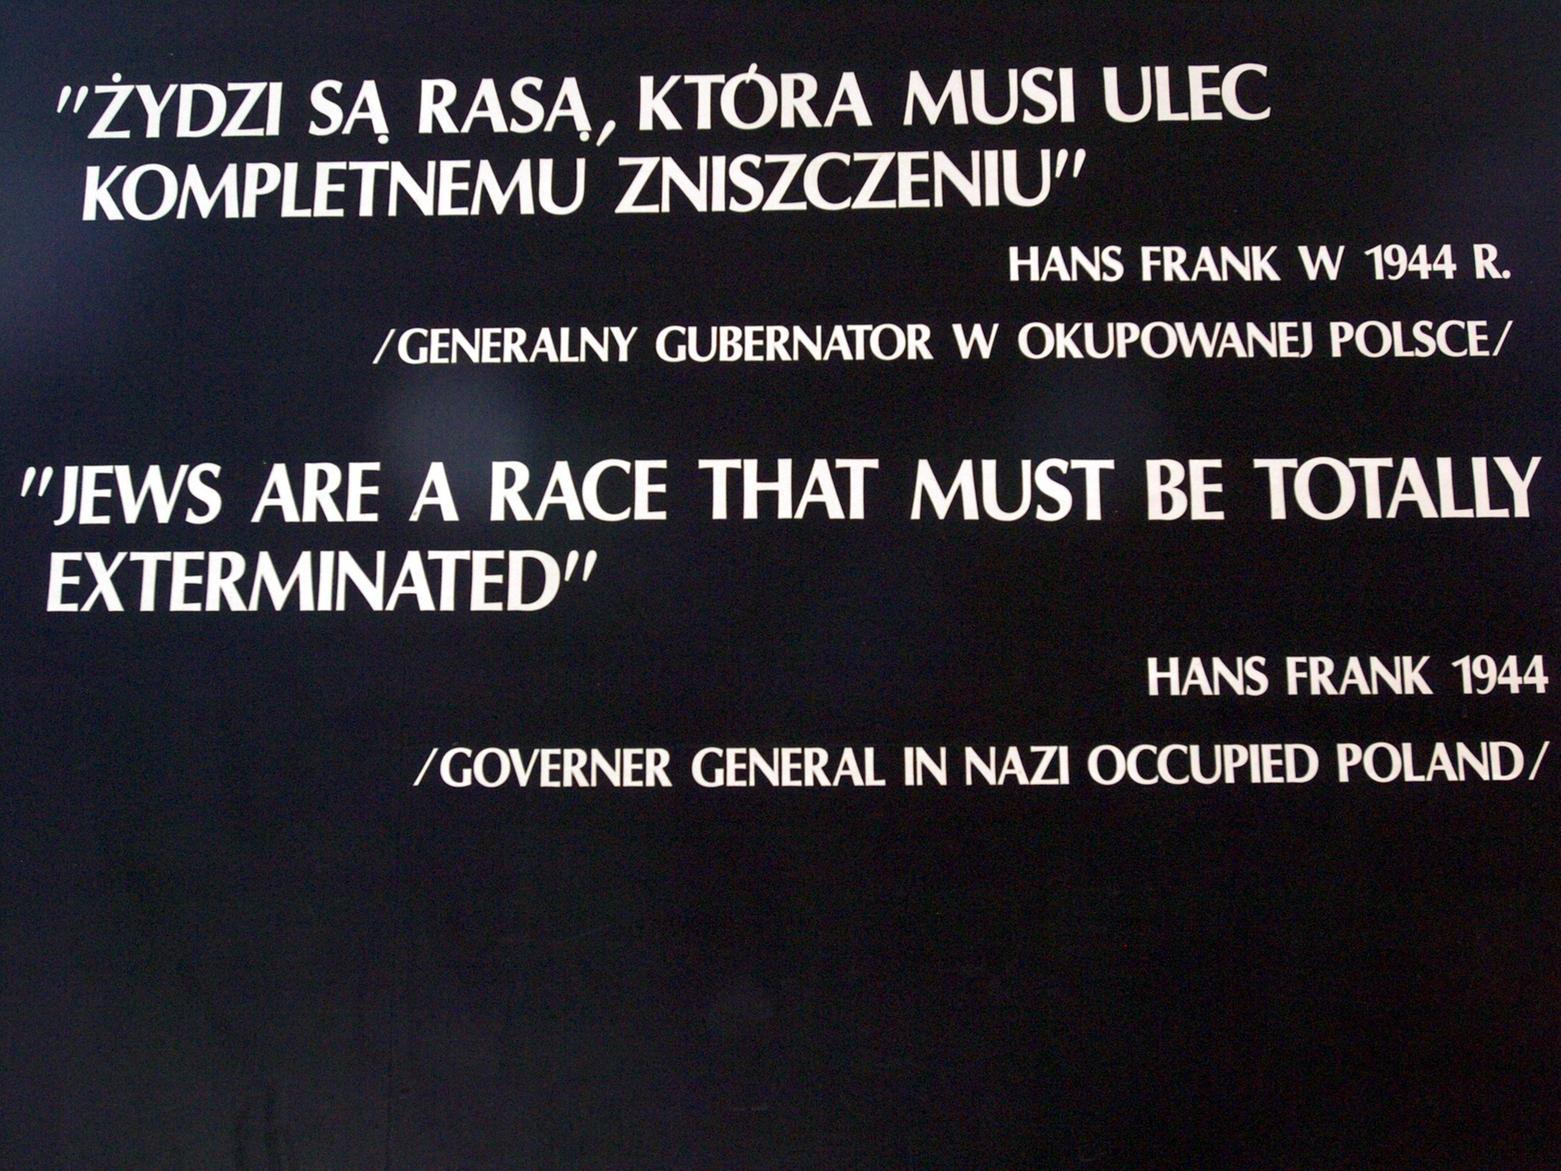 A sign in one of the barracks.